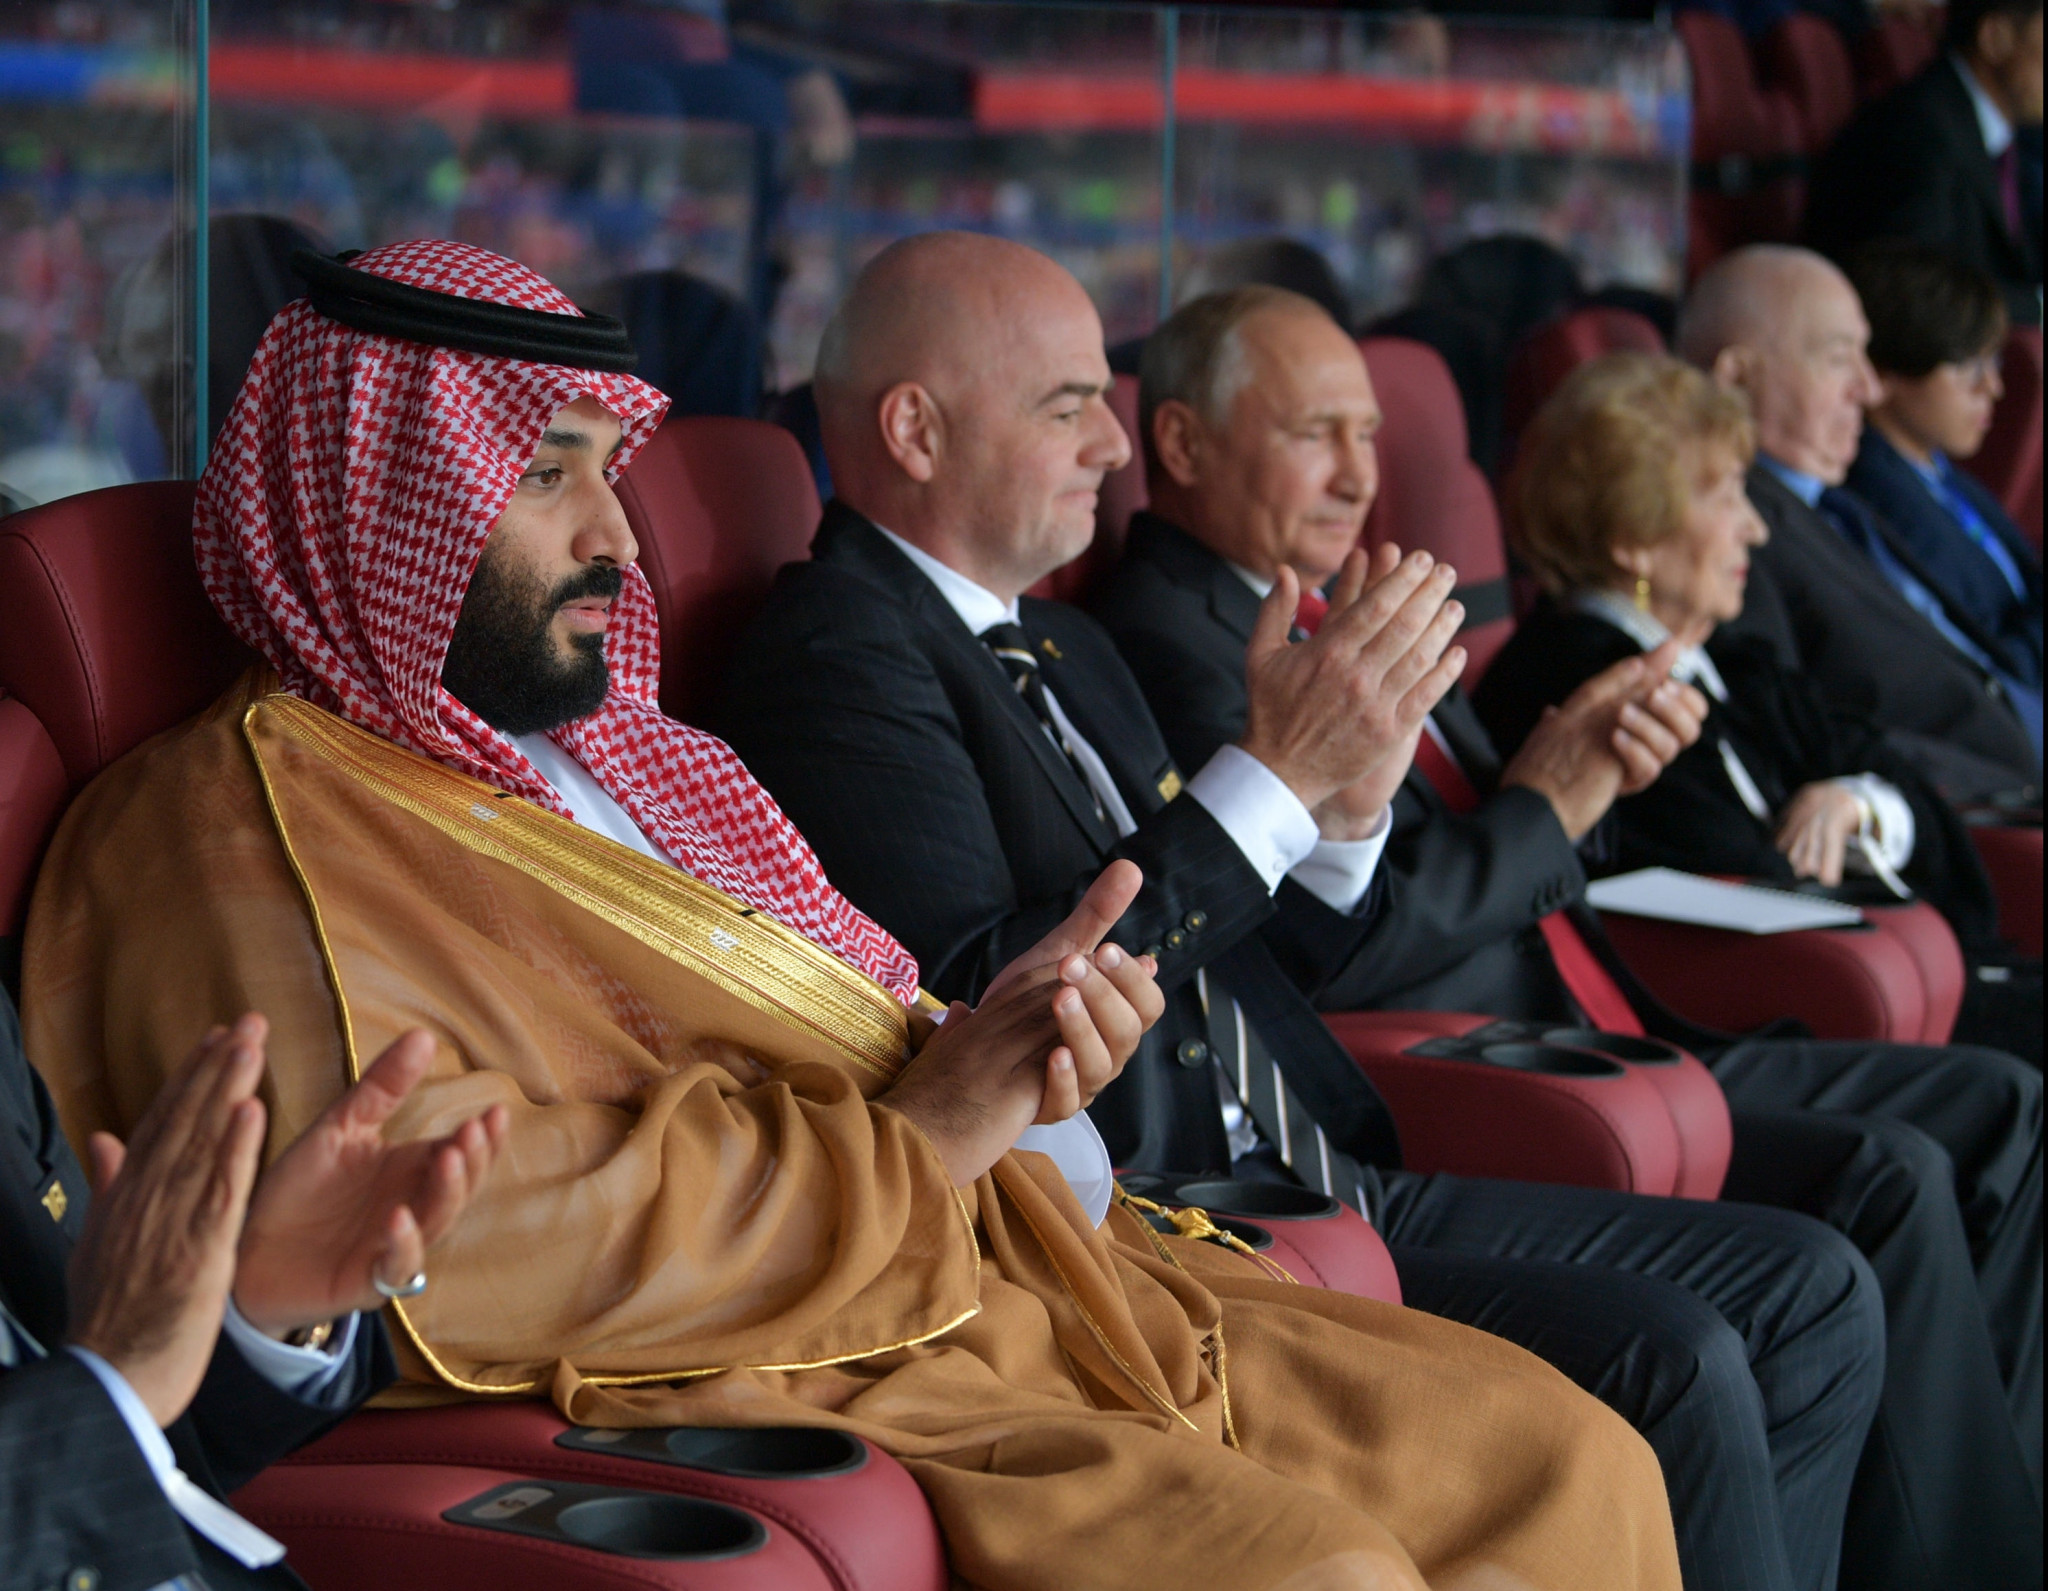 Saudi Arabian Crown Prince Mohammed bin Salman, left, alongside FIFA boss Gianni Infantino and Russian President Vladimir Putin, right, showing mixed emotions during the opening game ©Getty Images